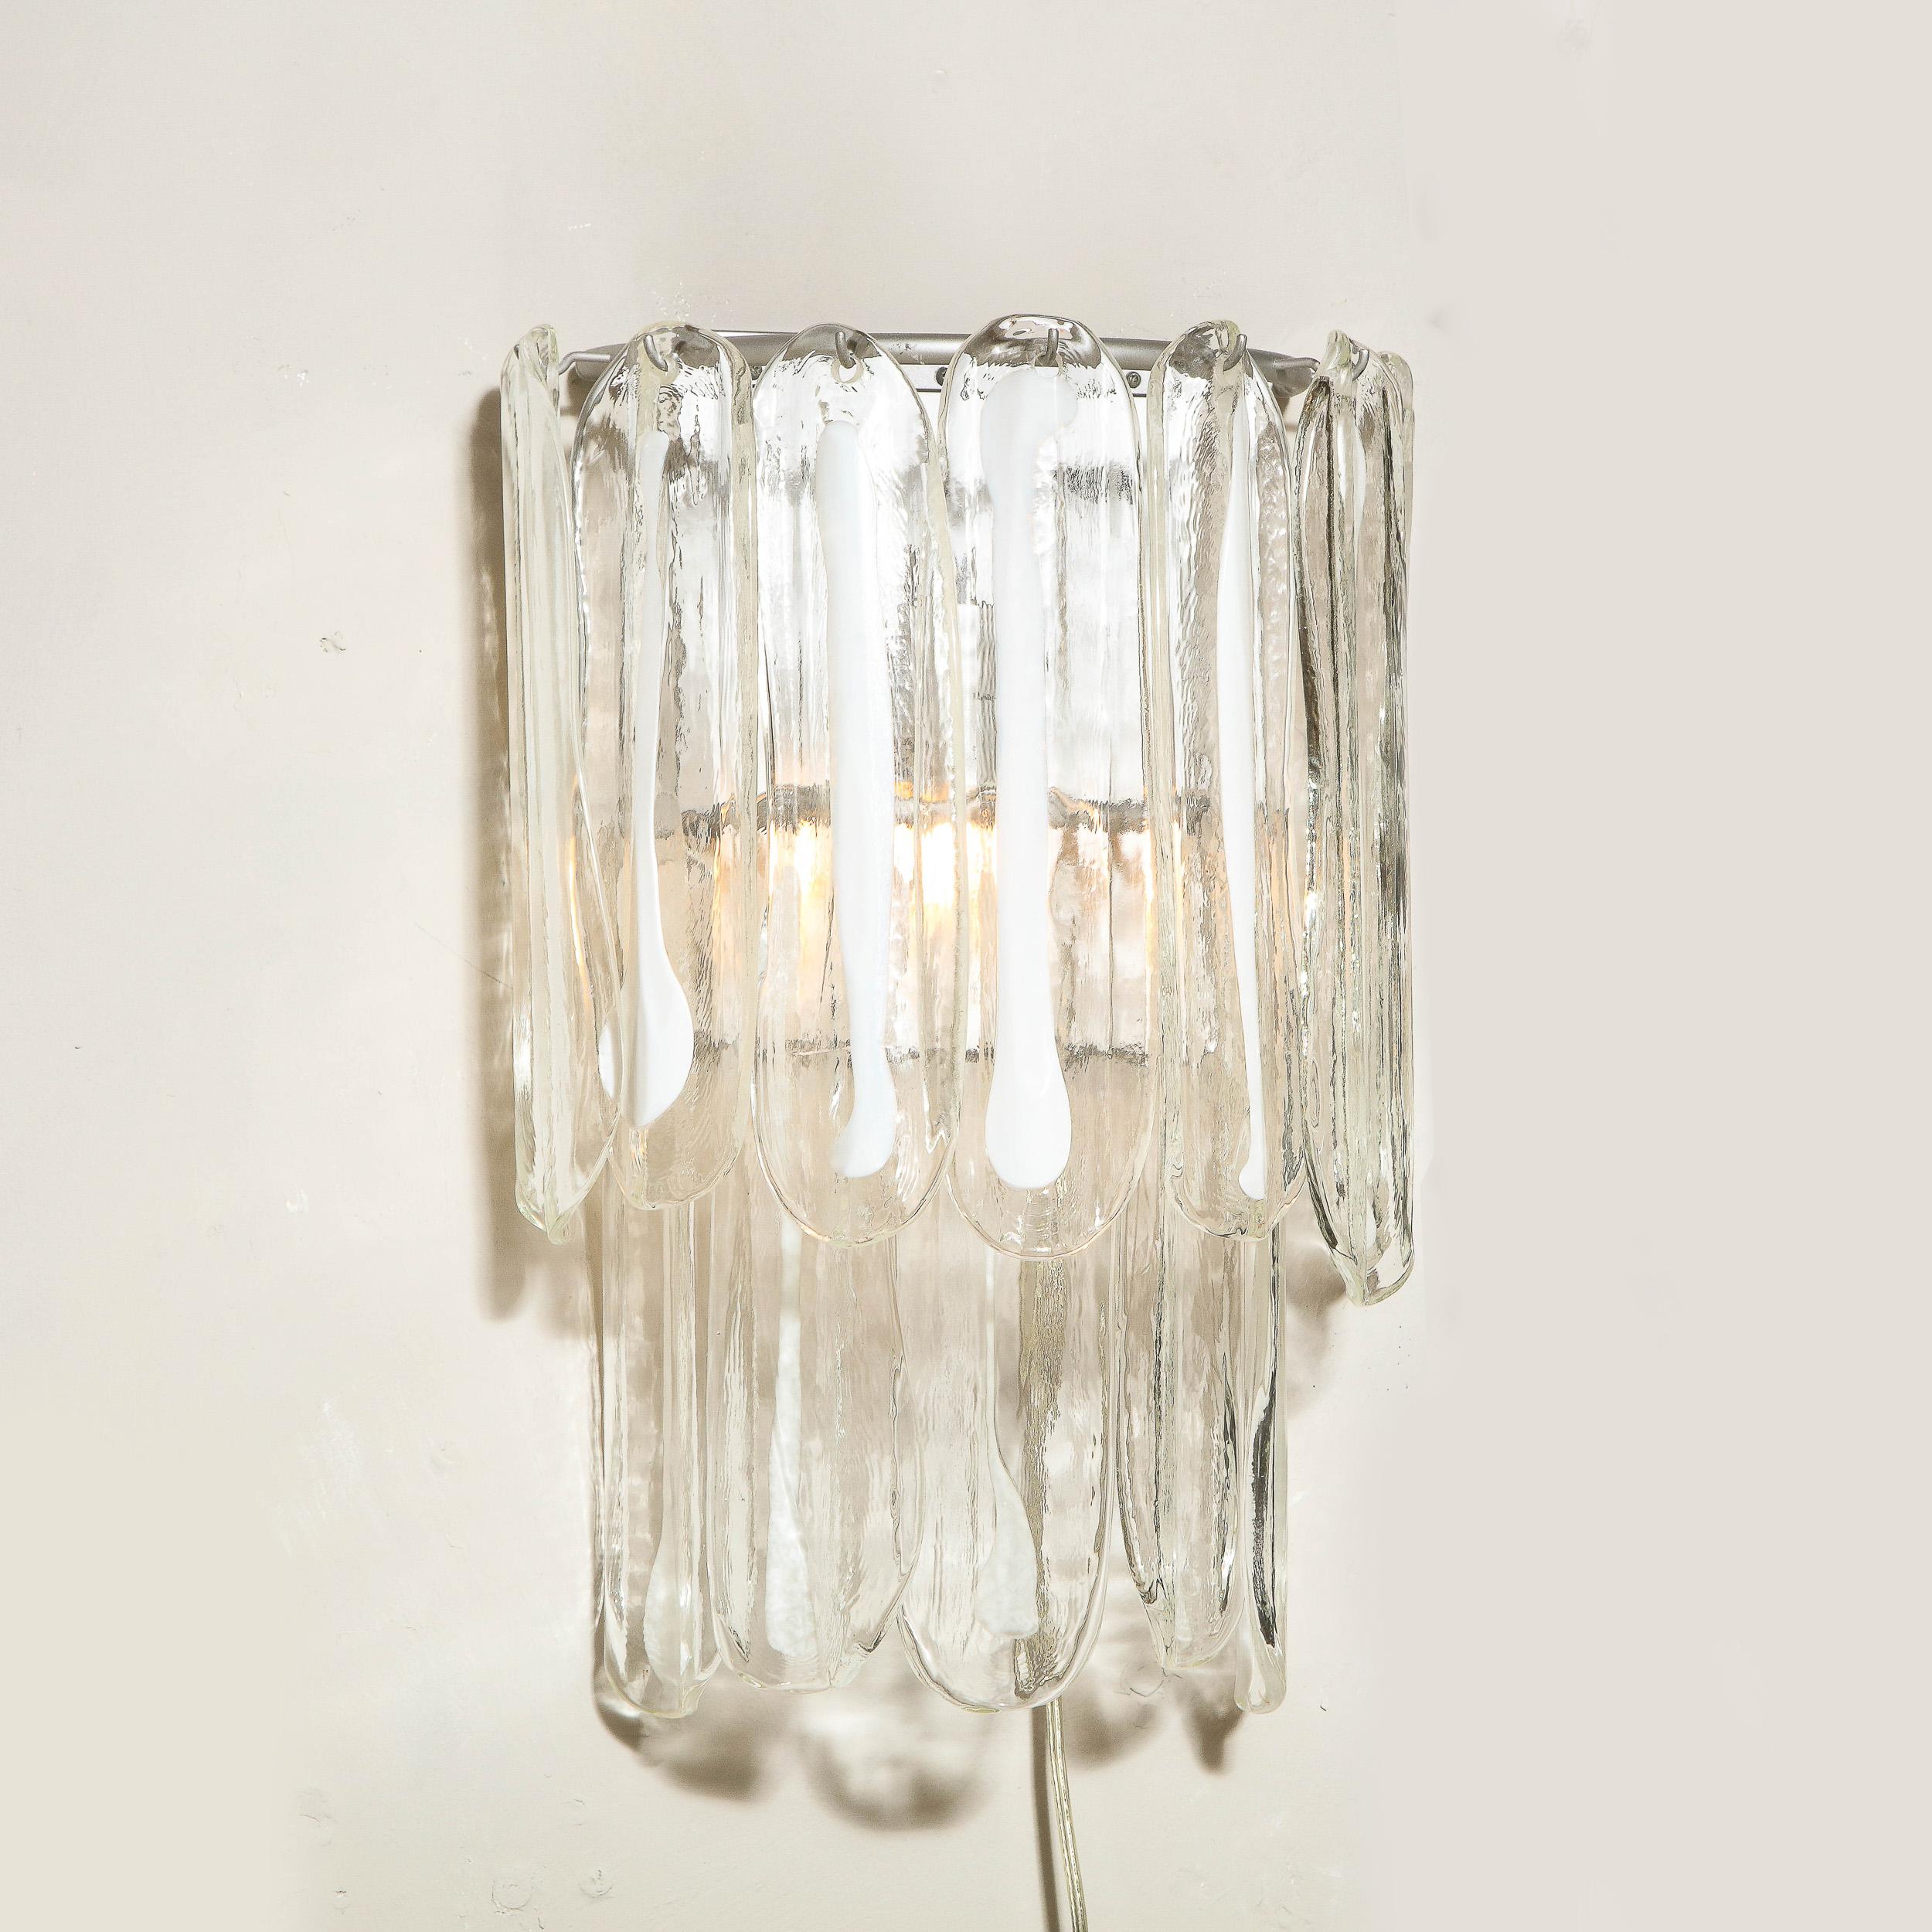 Late 20th Century Pair of Mid-Century Modern Translucent & White Murano Glass Sconces by Mazzega For Sale